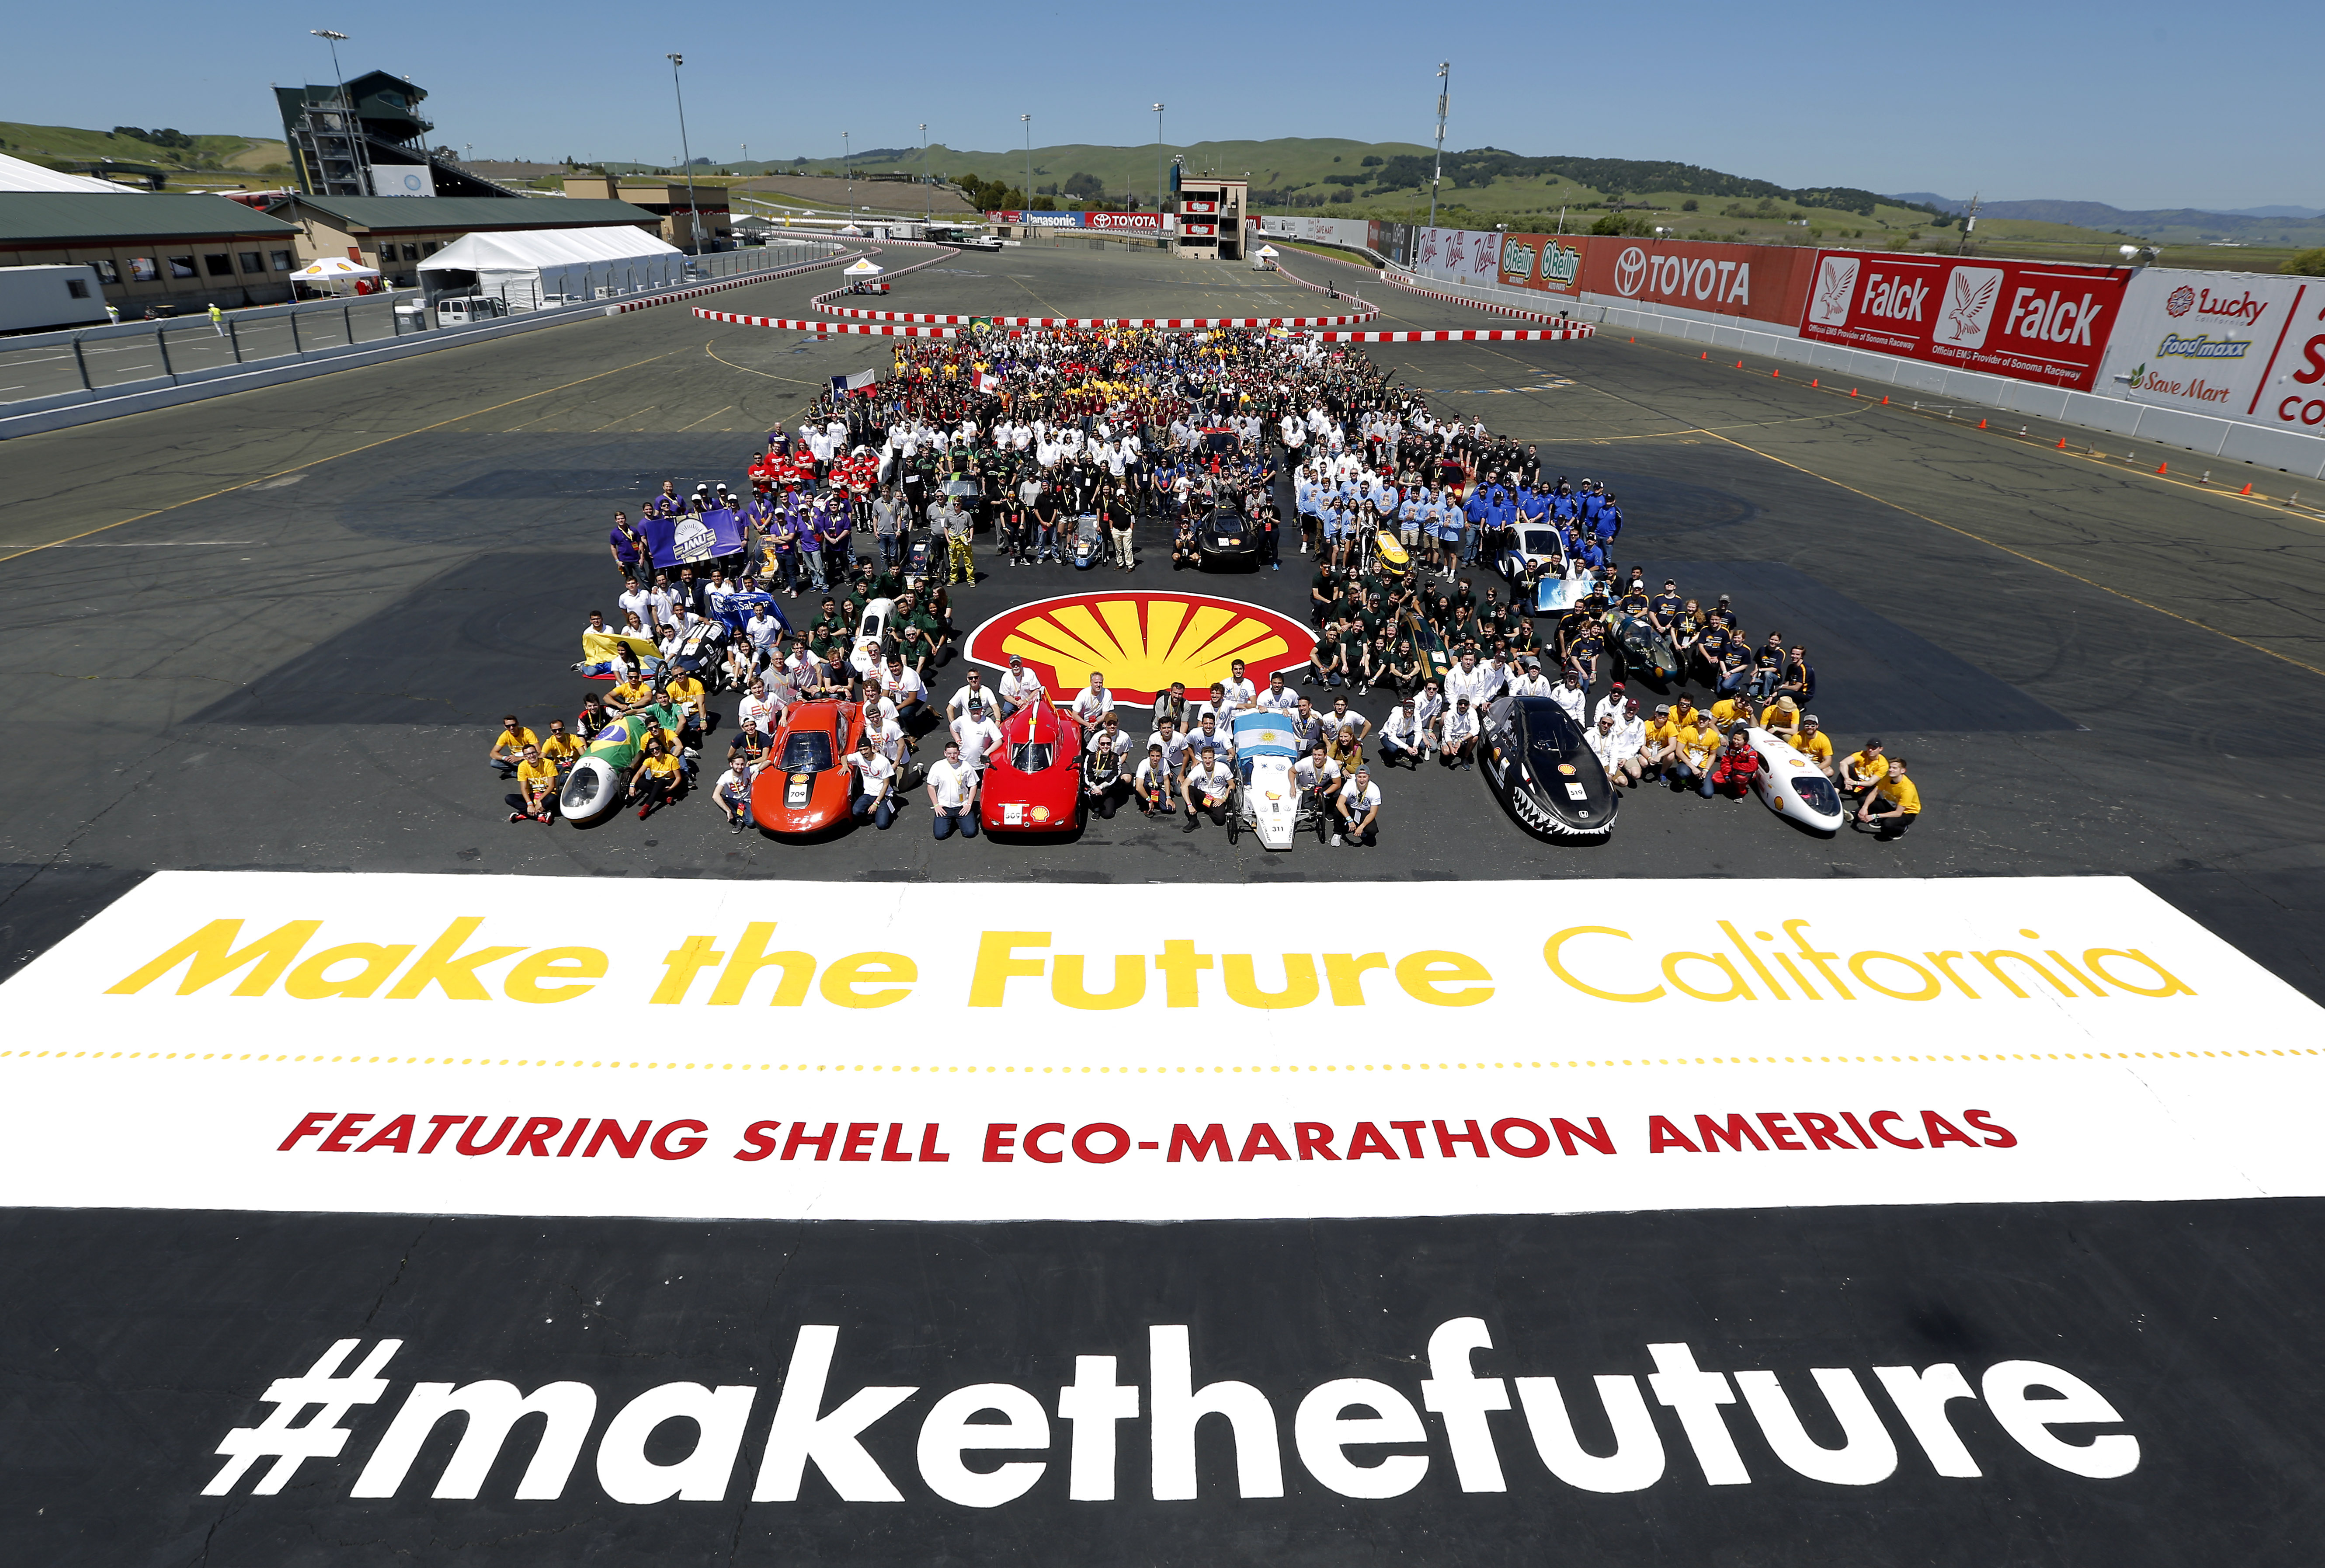 The family portrait during day two of Shell Make the Future at Sonoma Raceway